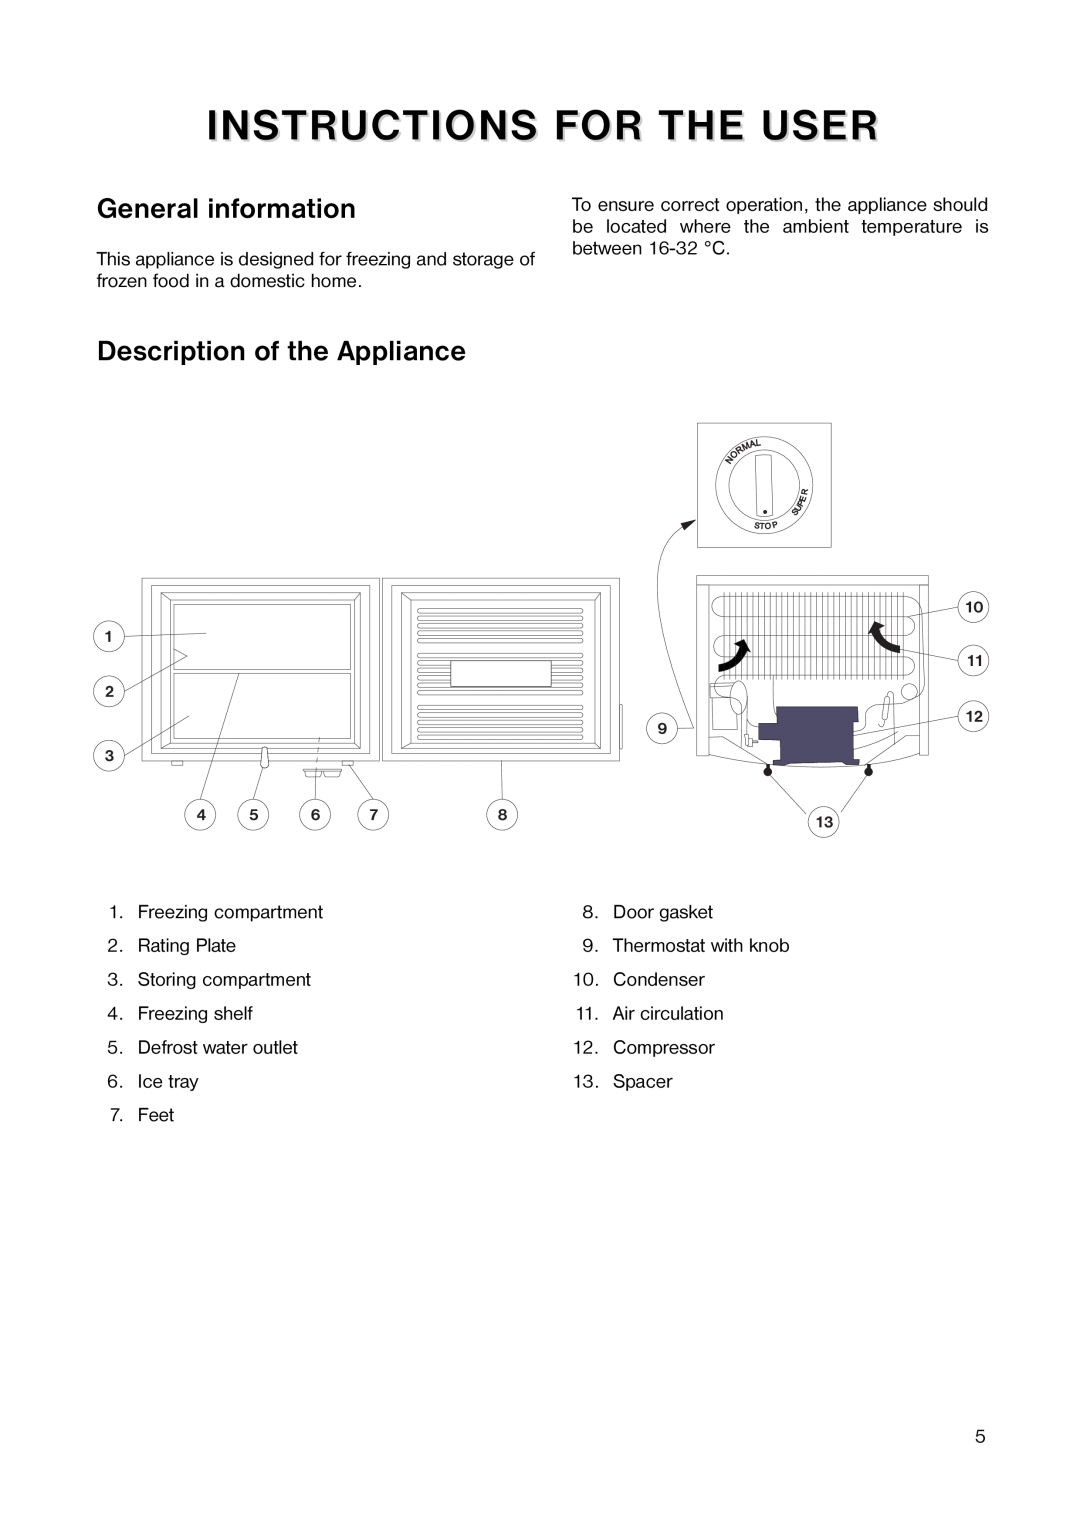 Electrolux EU 5563 C manual Instructions For The User, General information, Description of the Appliance 